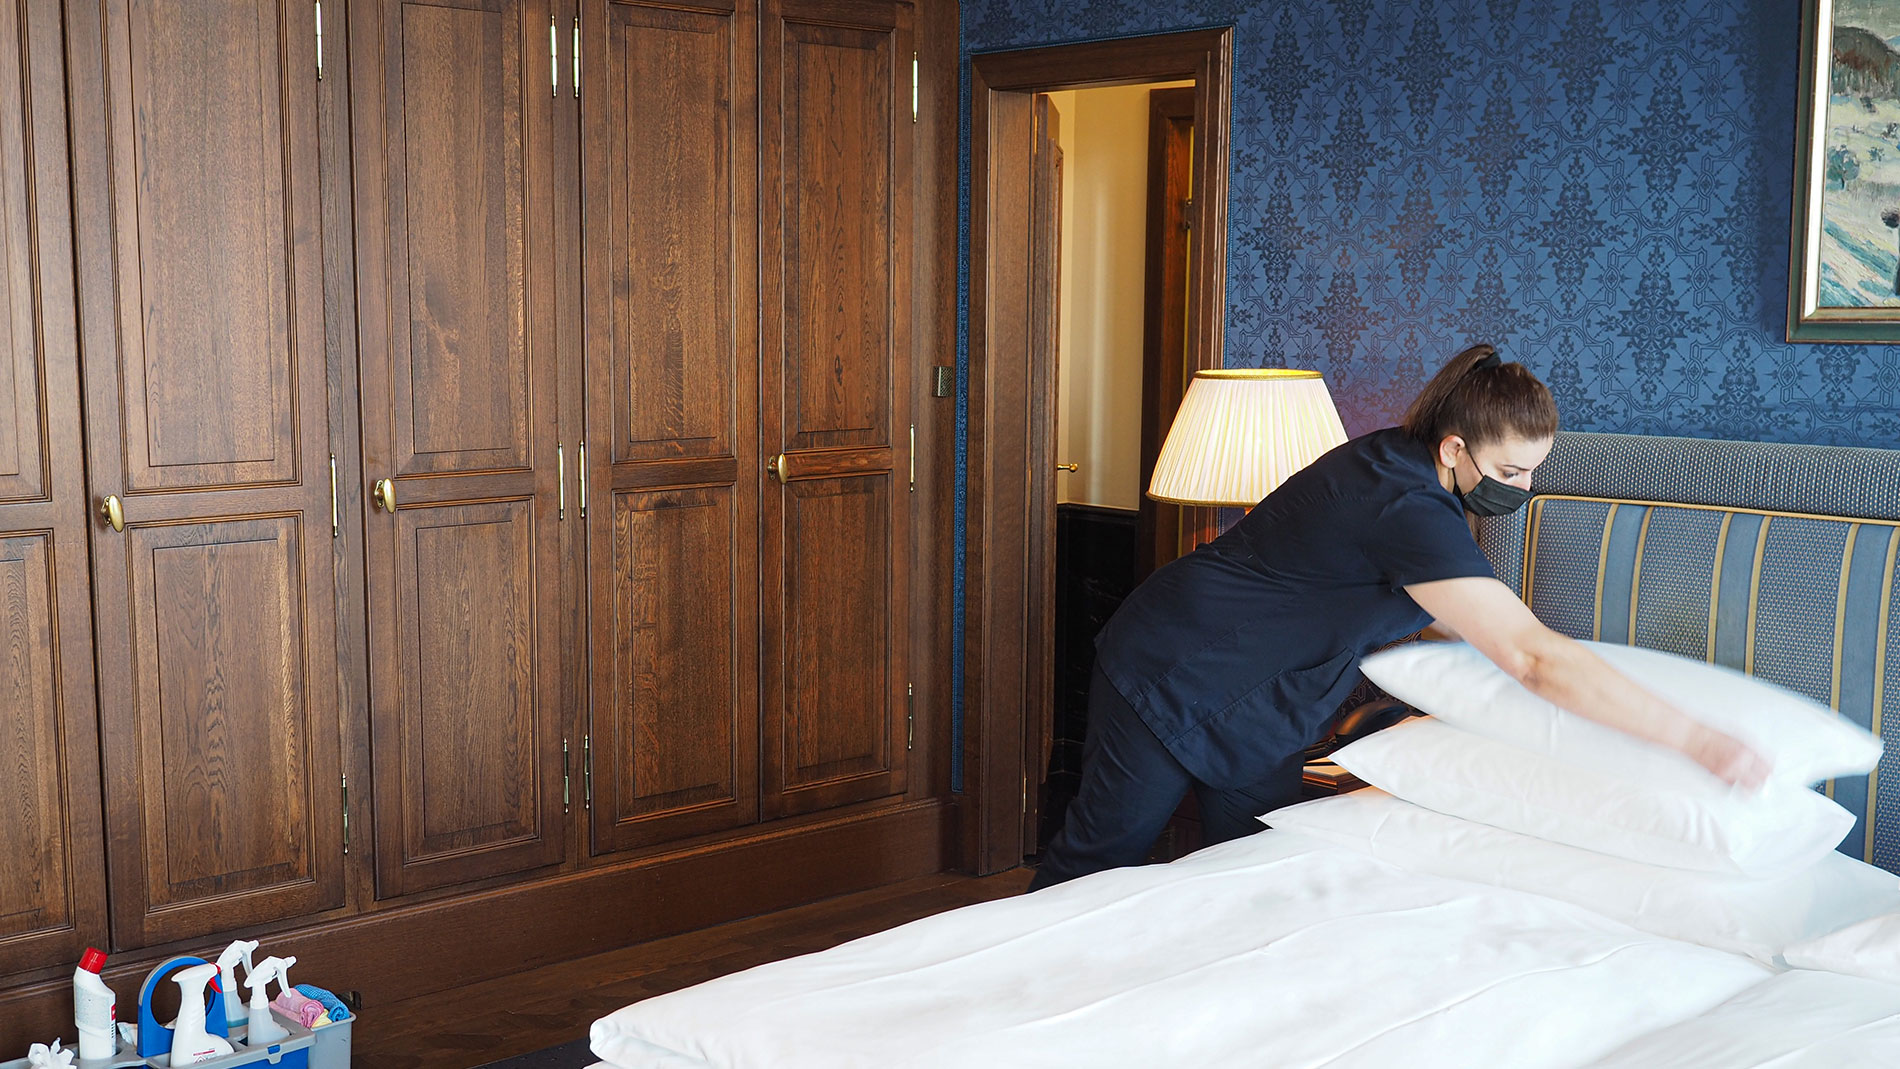 Making beds: Well trained, cleaning by colour system, new cleaning cloths for each room and a long list. The chambermaids at Les Trois Rois have a lot of work per room, but they also have time for it.